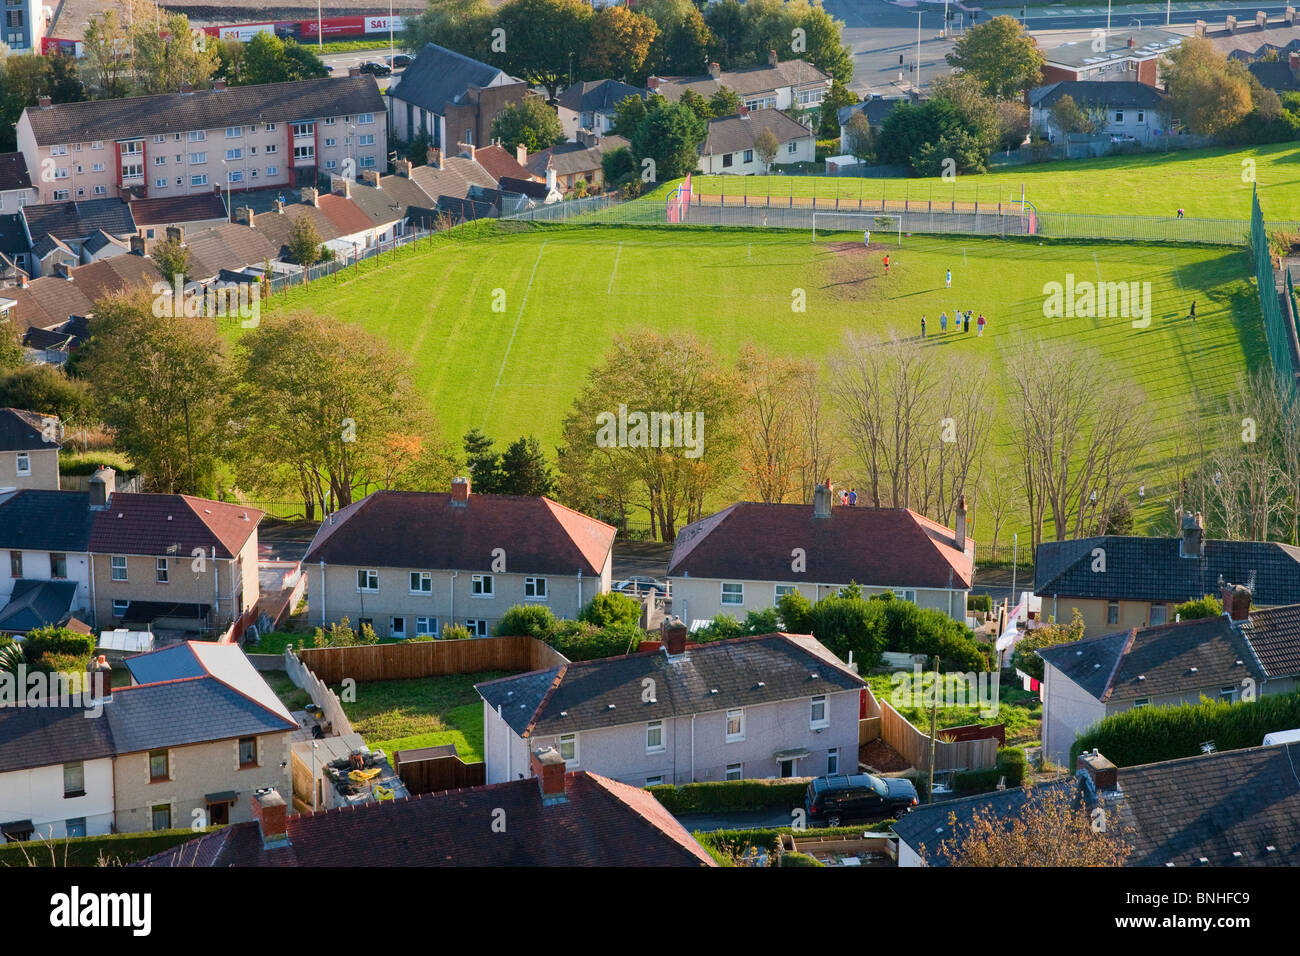 Housing showing green space in urban area Stock Photo